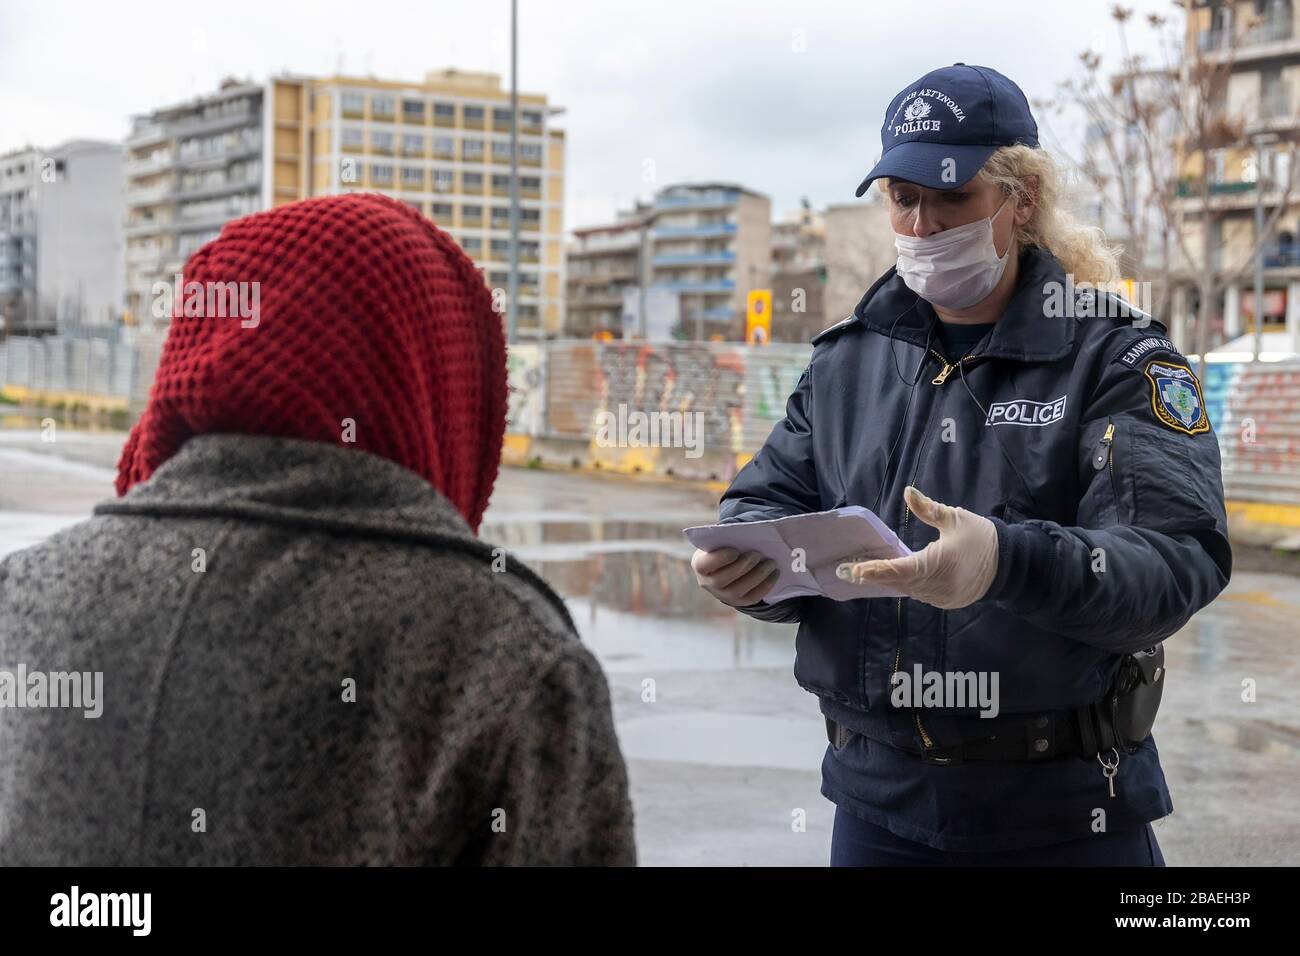 Thessaloniki, Greece - March 23, 2020: A police officer checks the documents of a citizen, as the country struggles to control the spread of the COVID Stock Photo